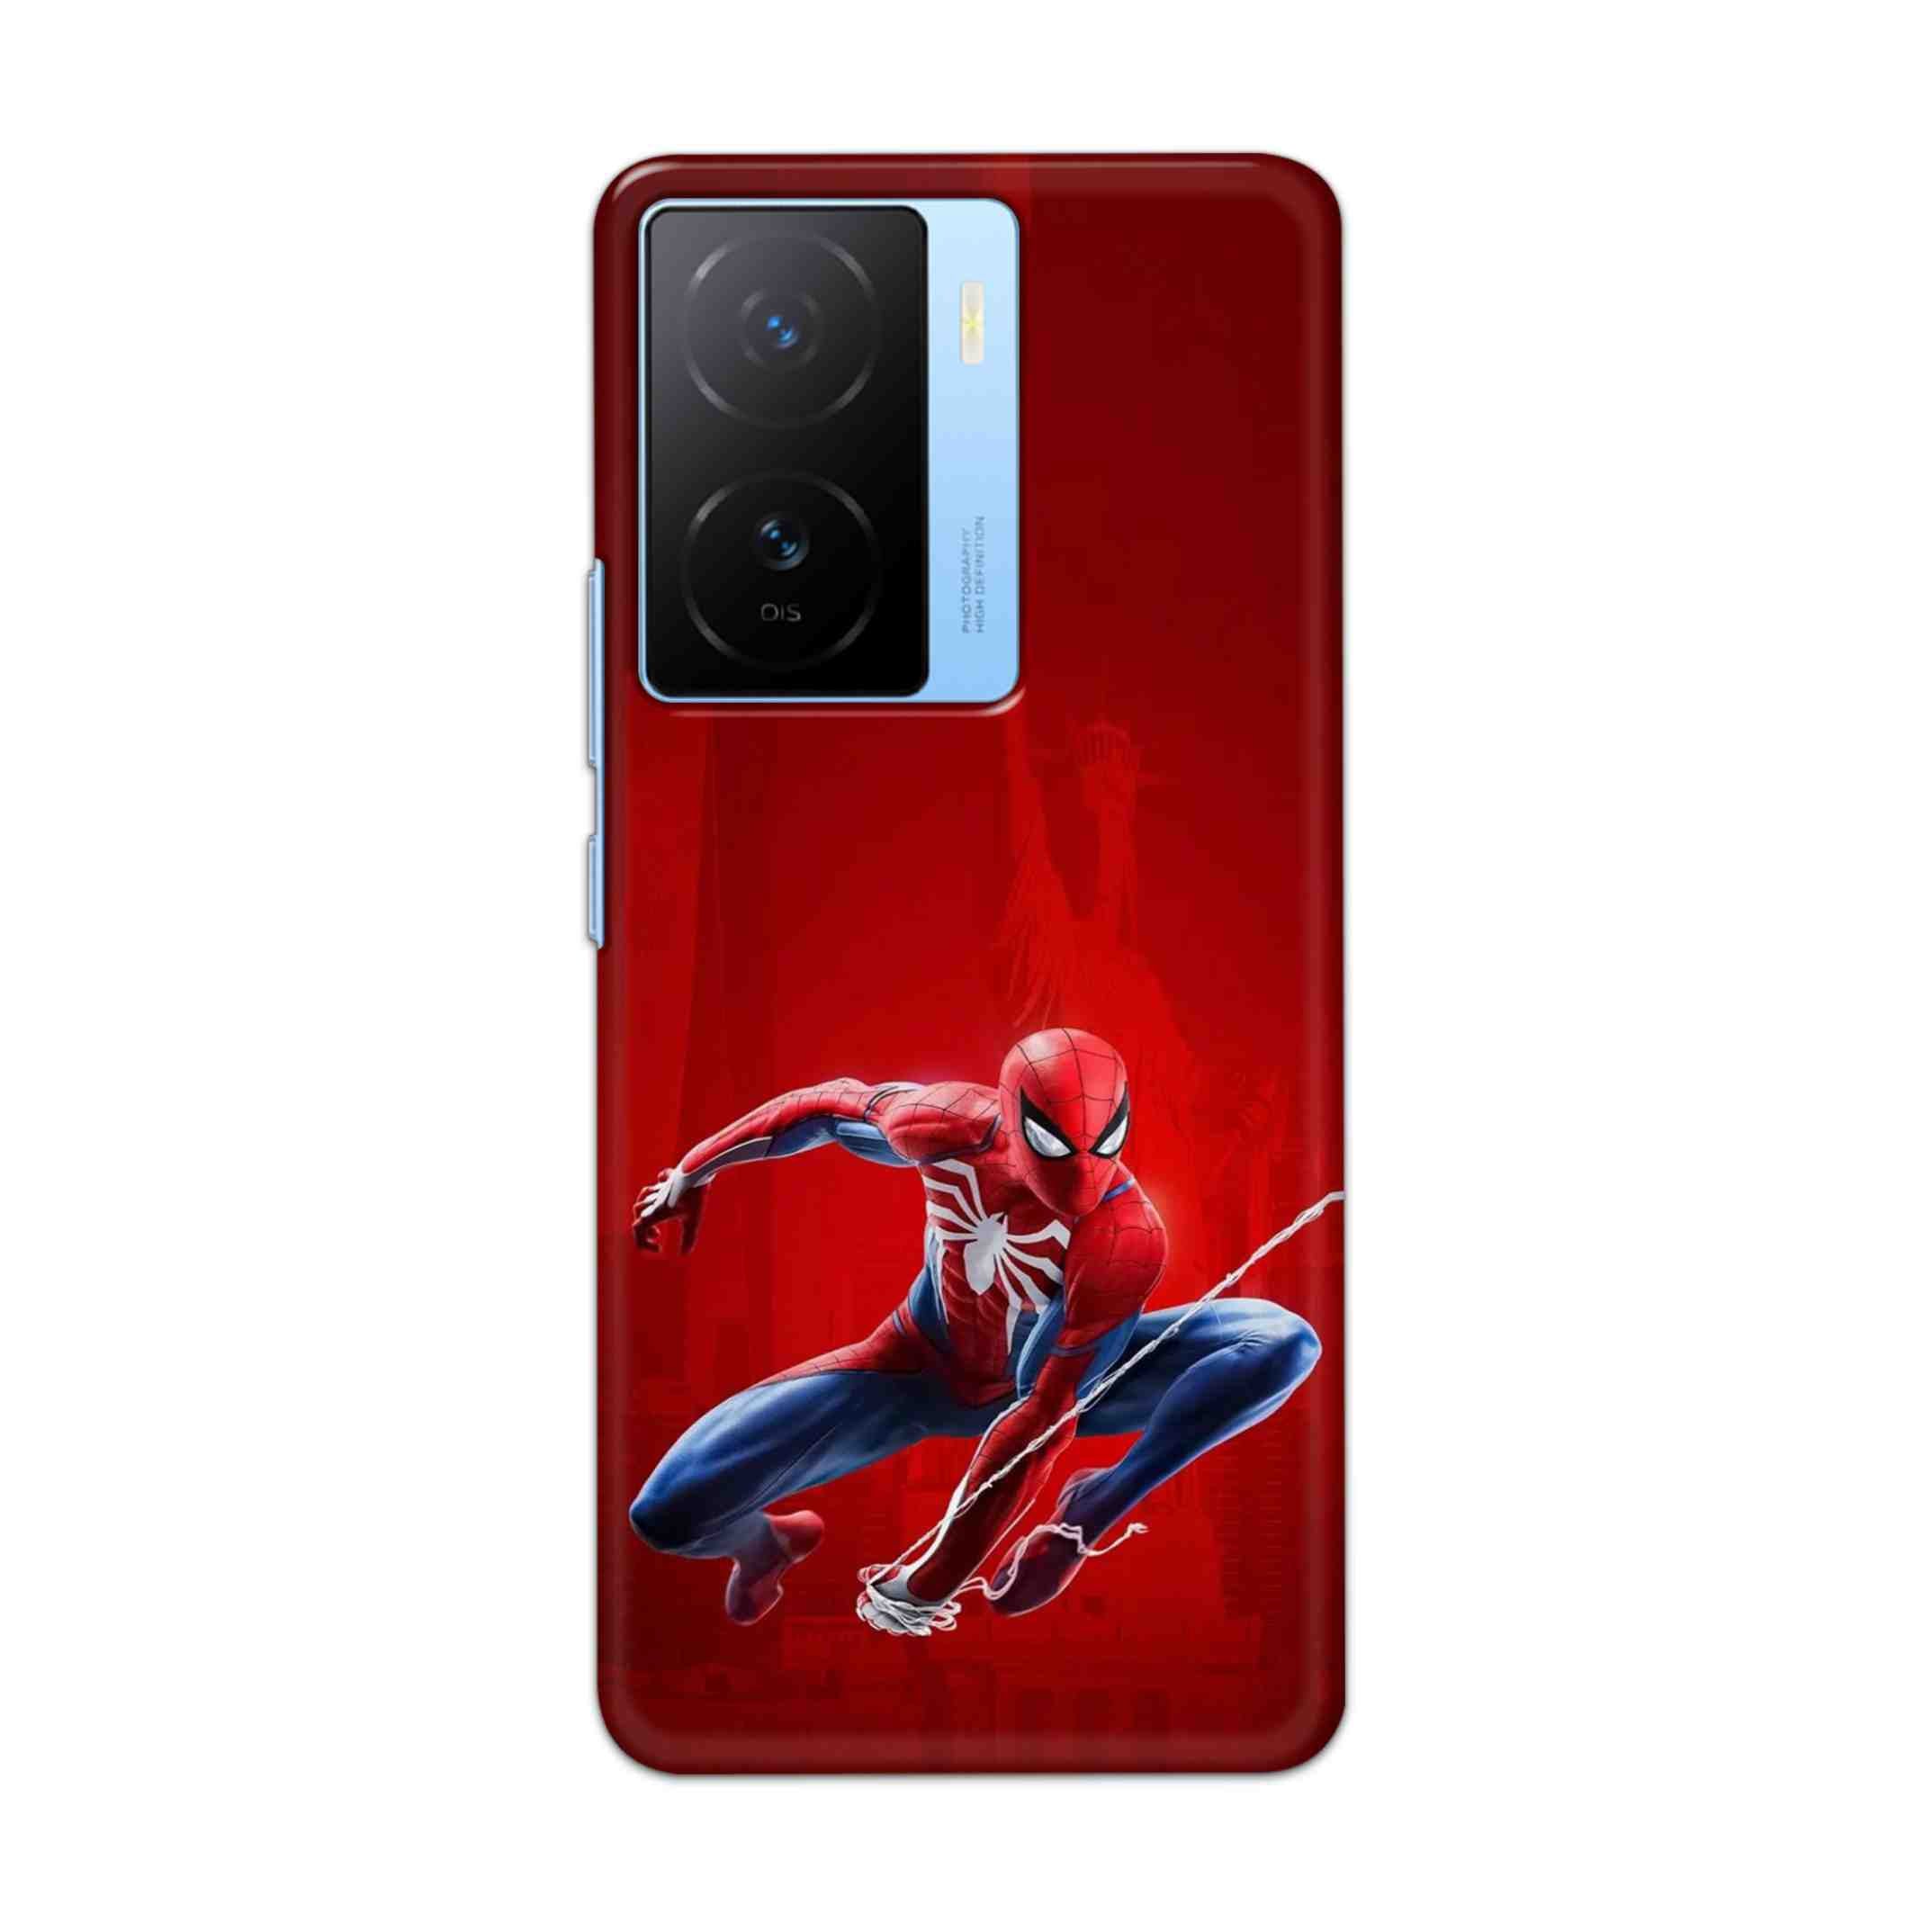 Buy Spiderman 2 Hard Back Mobile Phone Case/Cover For iQOO Z7s Online